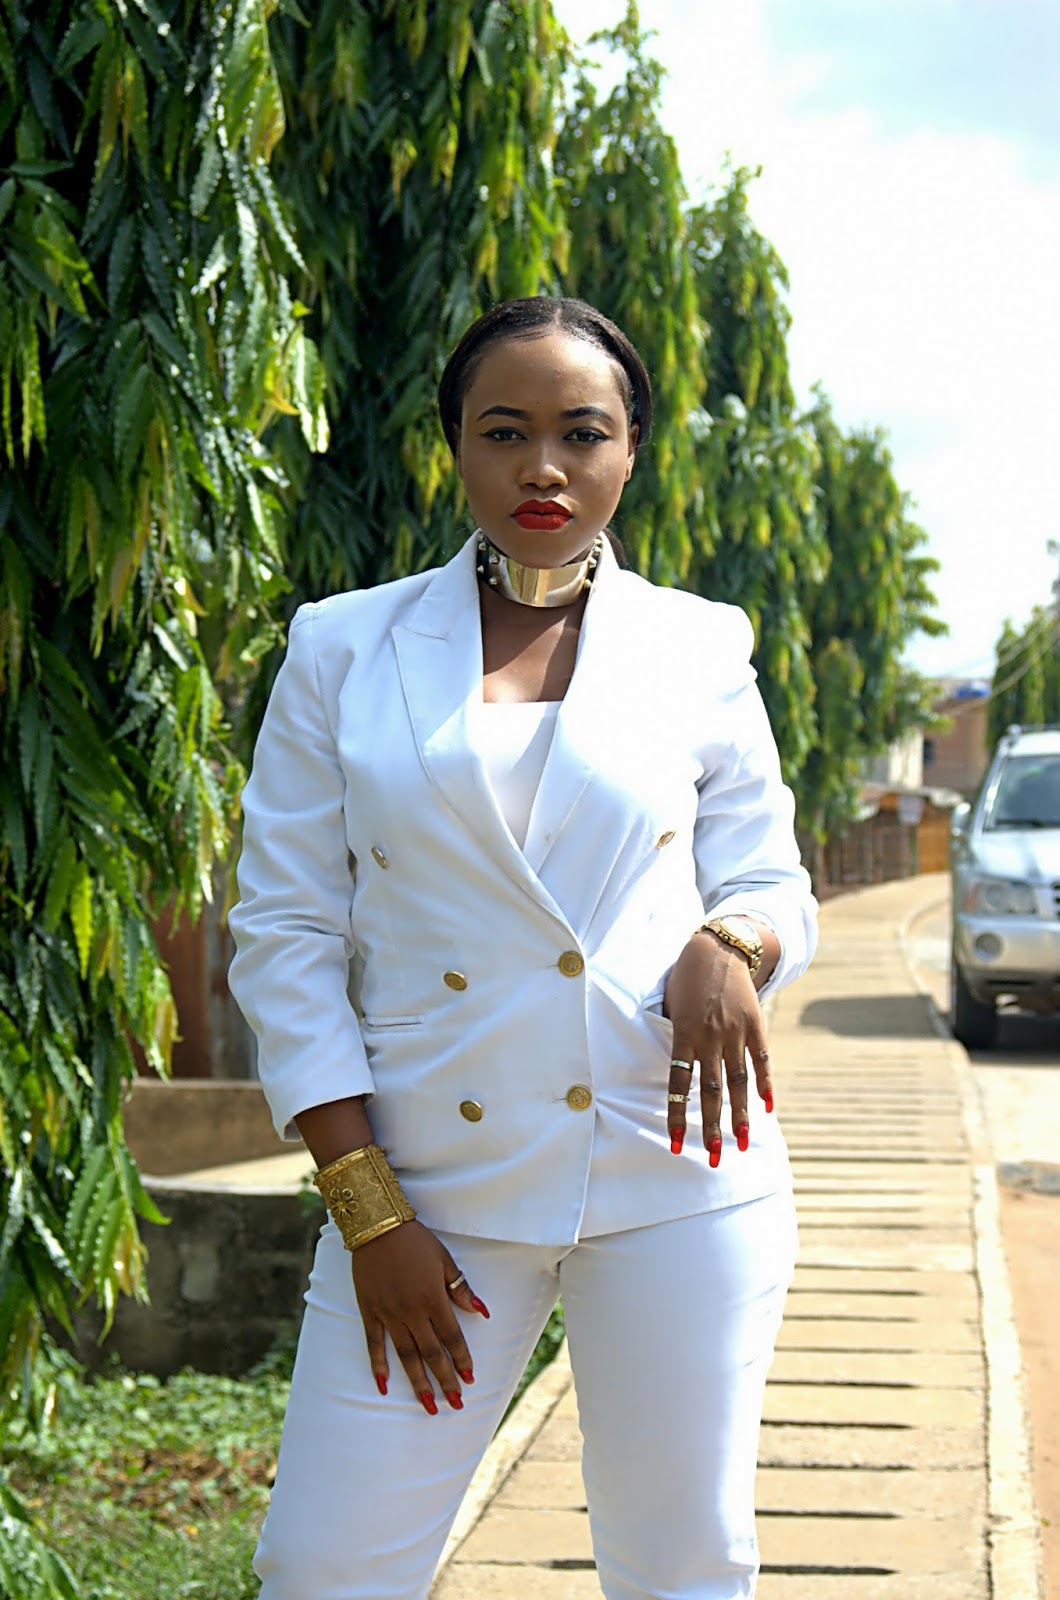 THE BEST WAY TO STYLE A WHITE PANT SUIT  Lagos City Chic by Mary Edoro